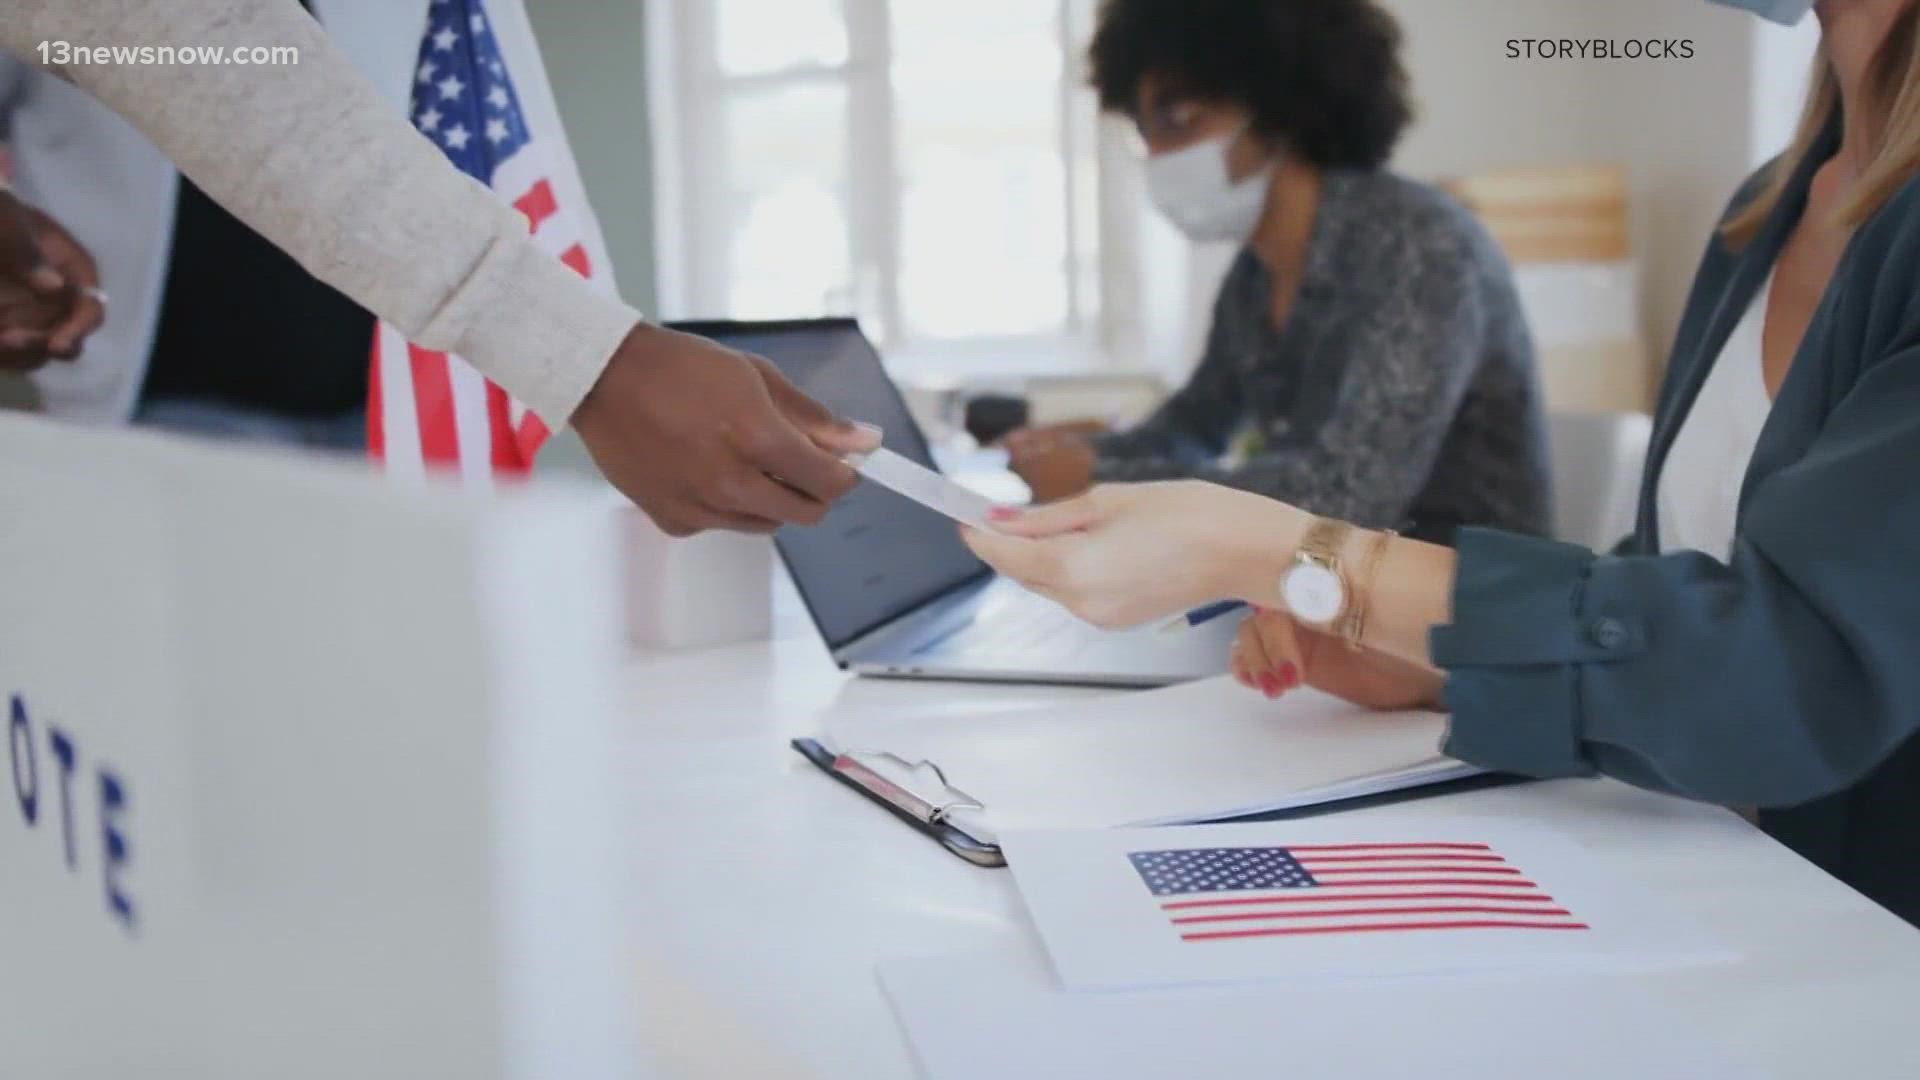 What to do if you run into aggressive behavior at the polls.